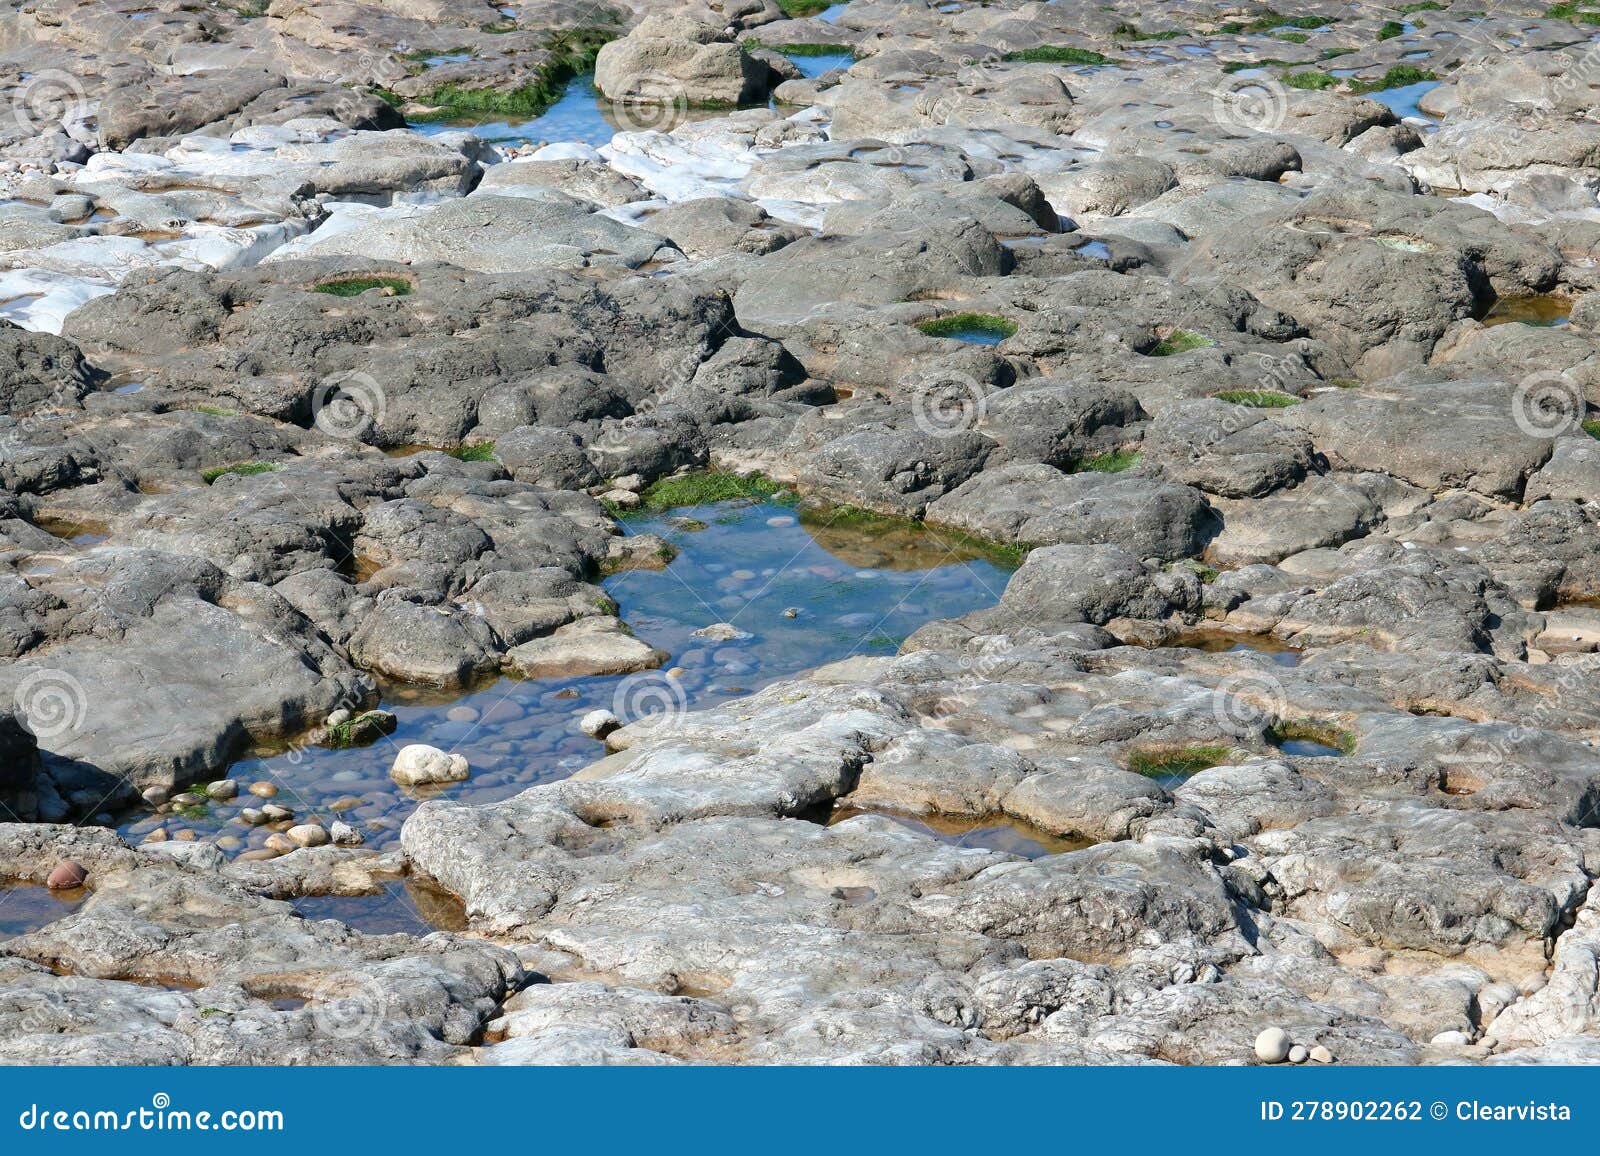 rock pool in rocks by the sea at porthcawl, wales.